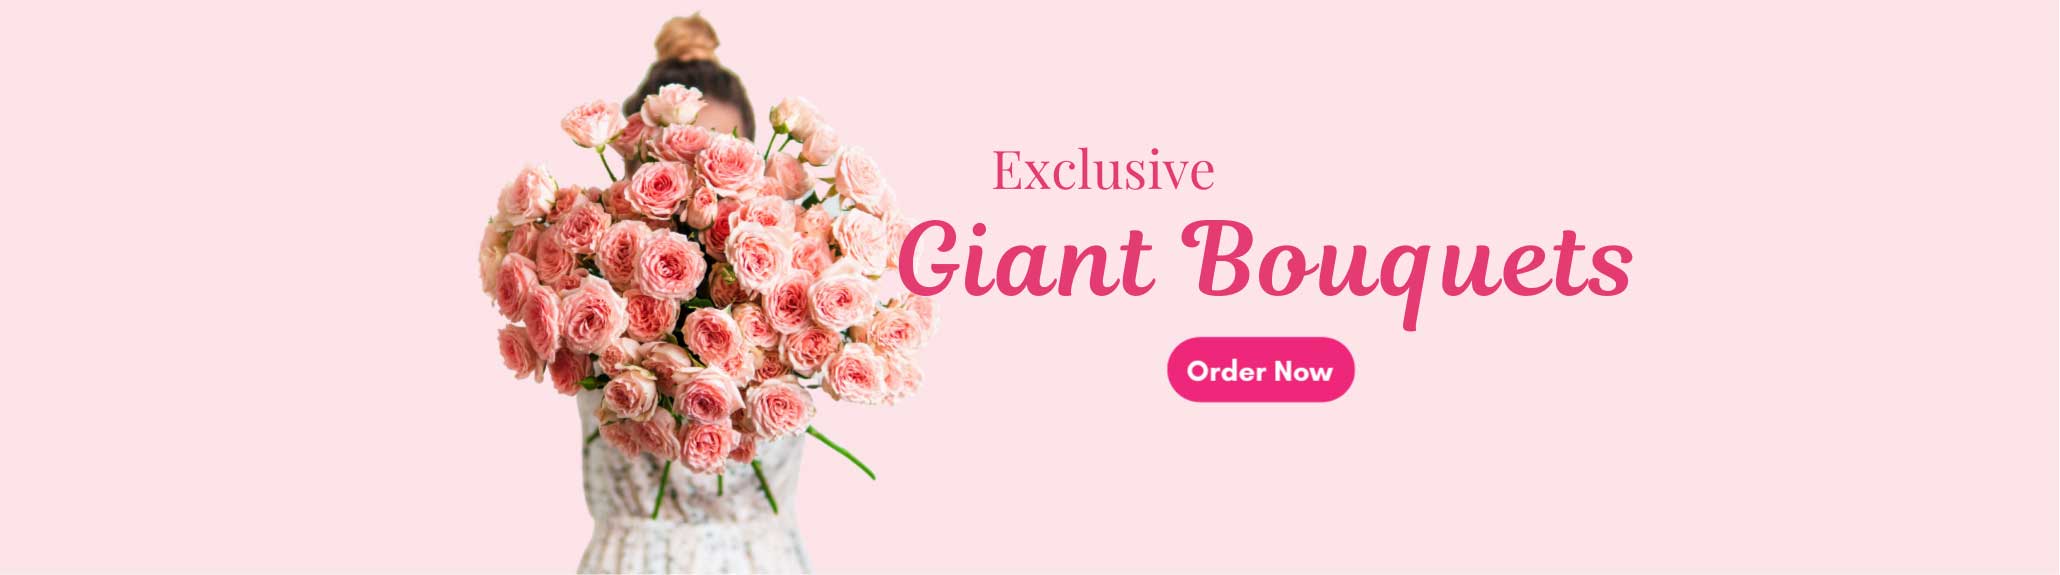 Giant Bouquets Philippines